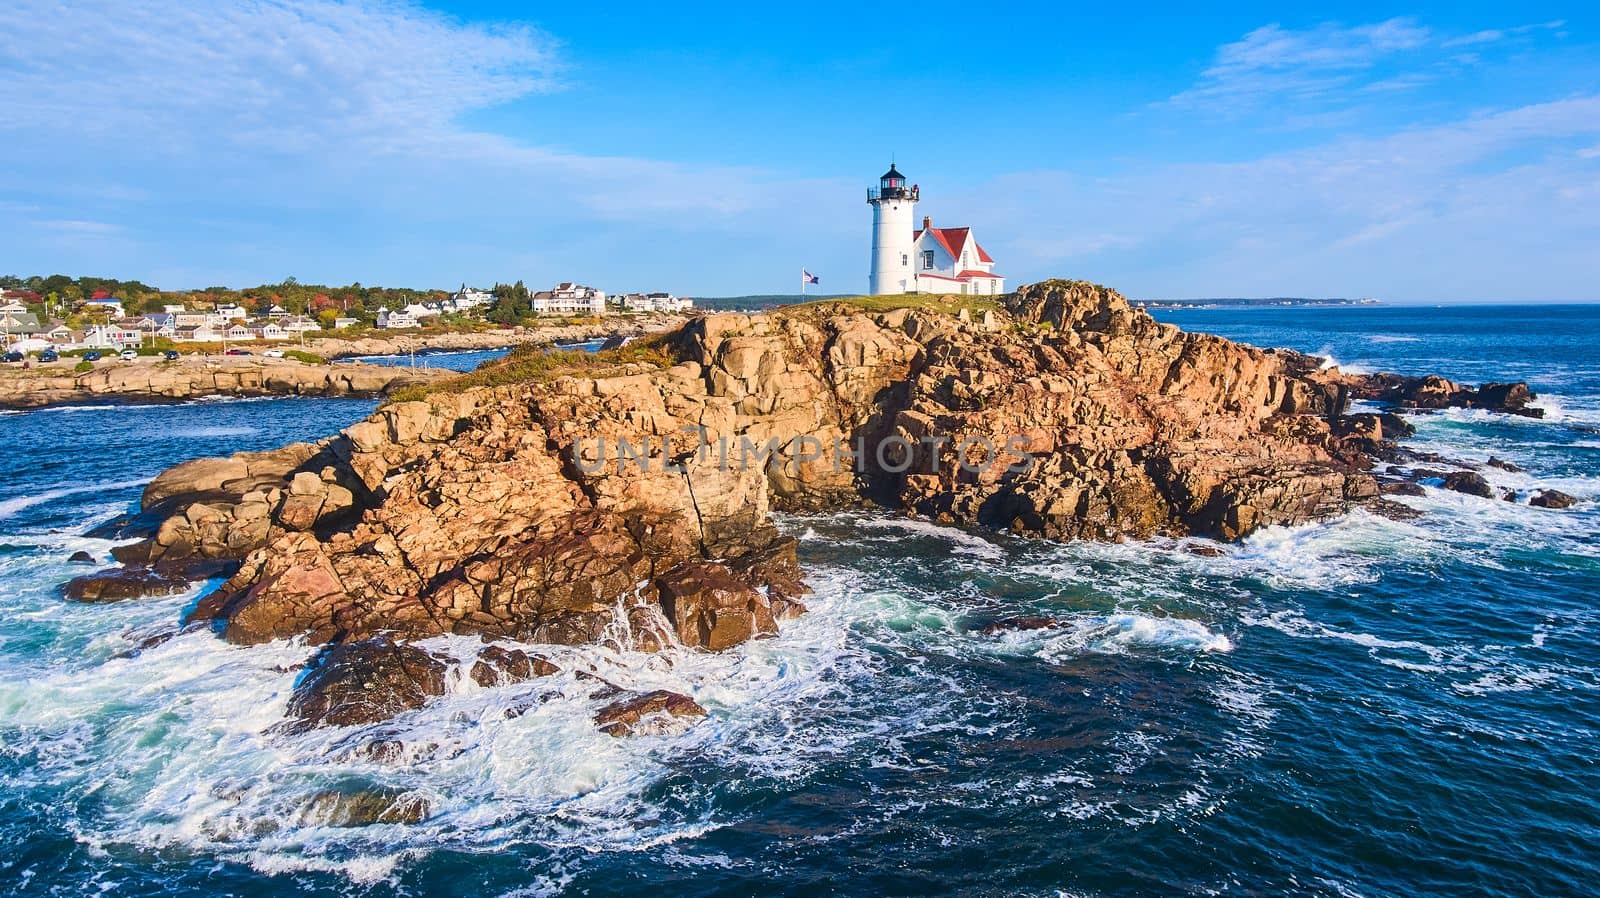 Image of Huge rocky island with lighthouse on Maine coast aerial with waves crashing over rocks